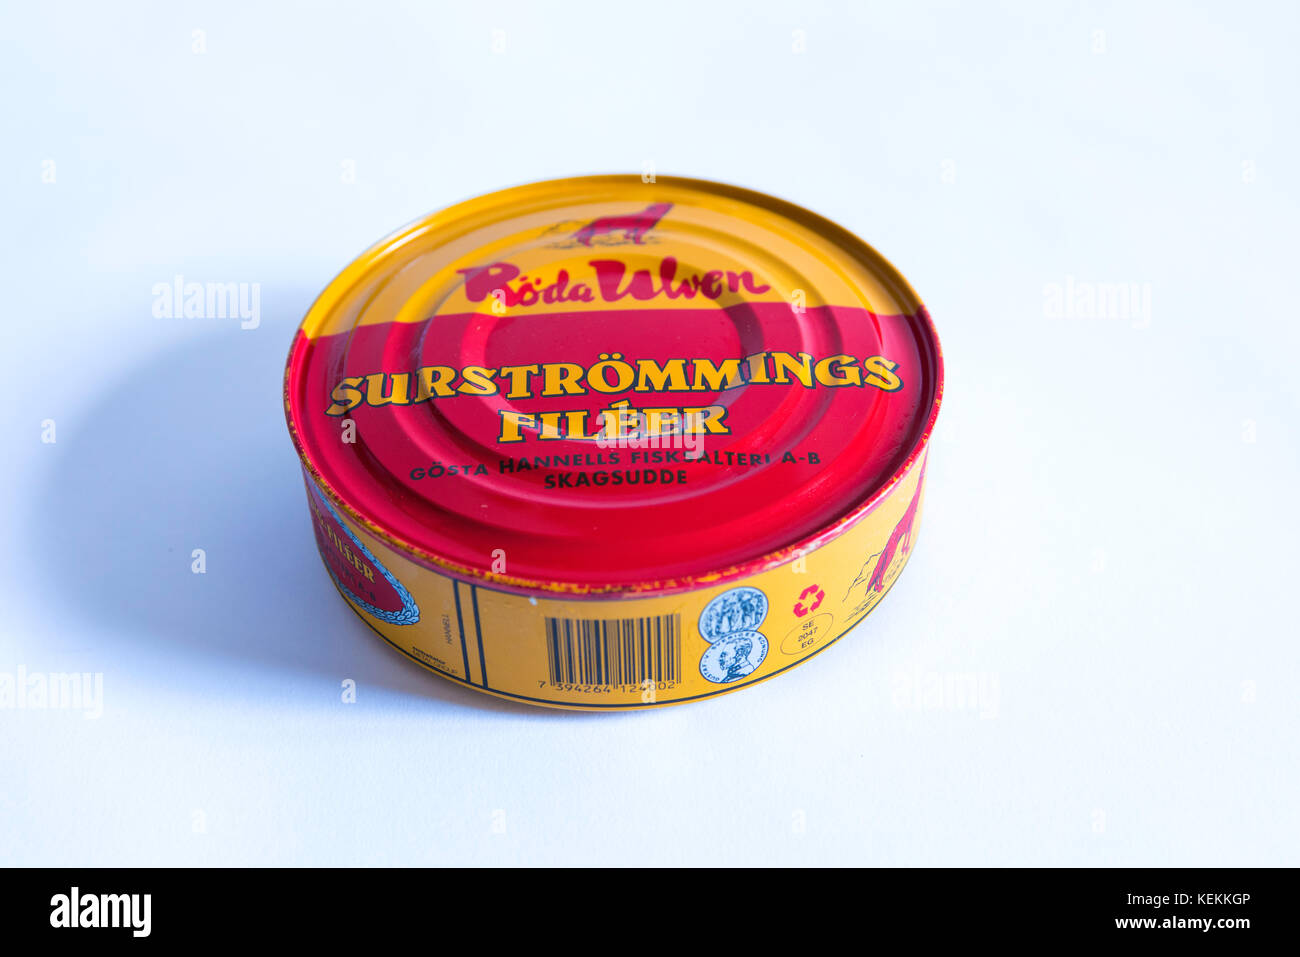 Cans of Roda Ulven surstomming. Considered by many to be the world's smelliest food. Stock Photo